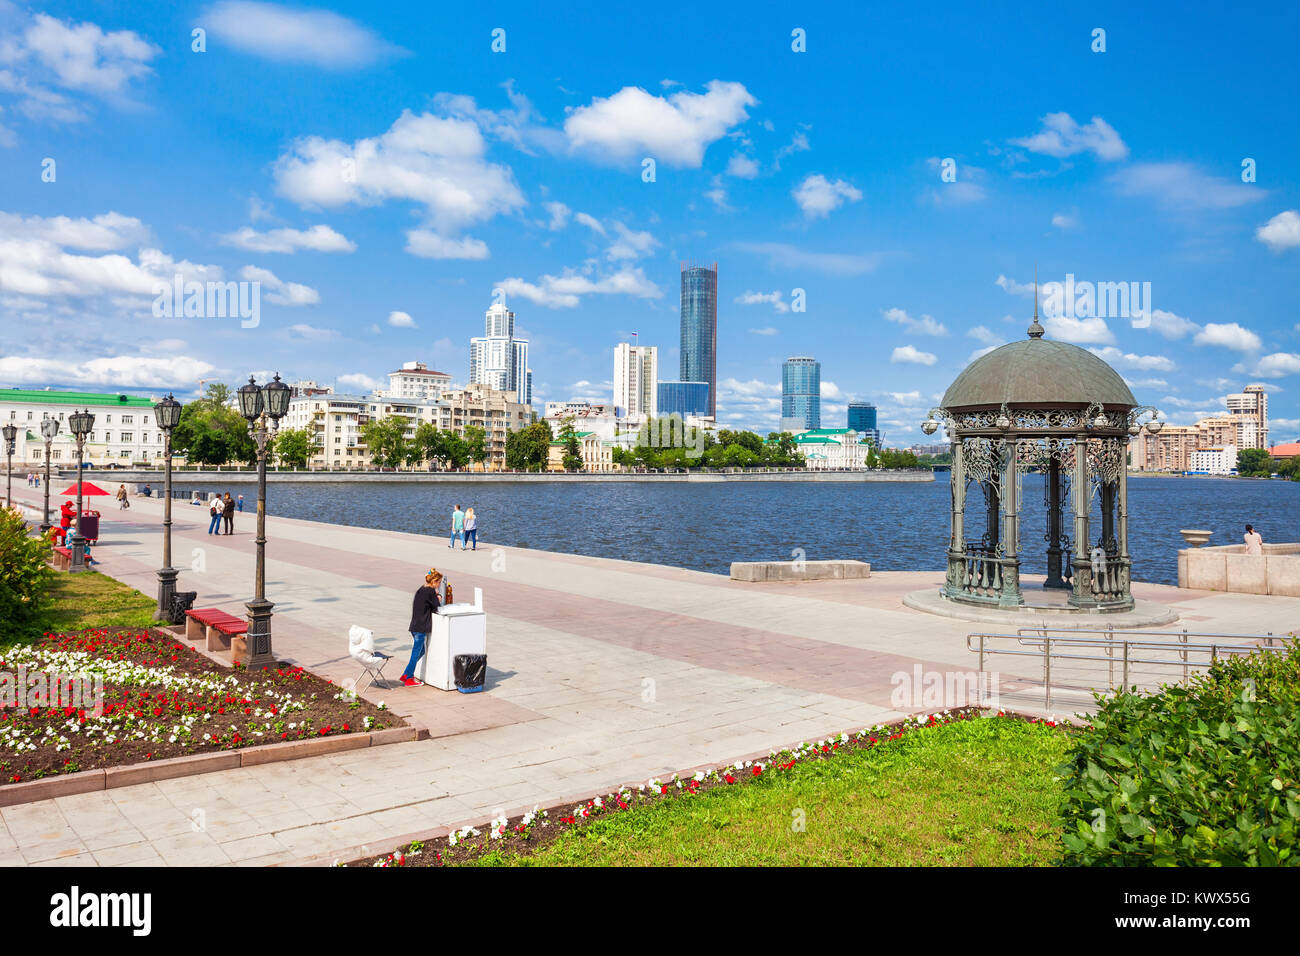 Yekaterinburg city center skyline and Iset river. Ekaterinburg is the fourth largest city in Russia and the centre of Sverdlovsk Oblast. Stock Photo